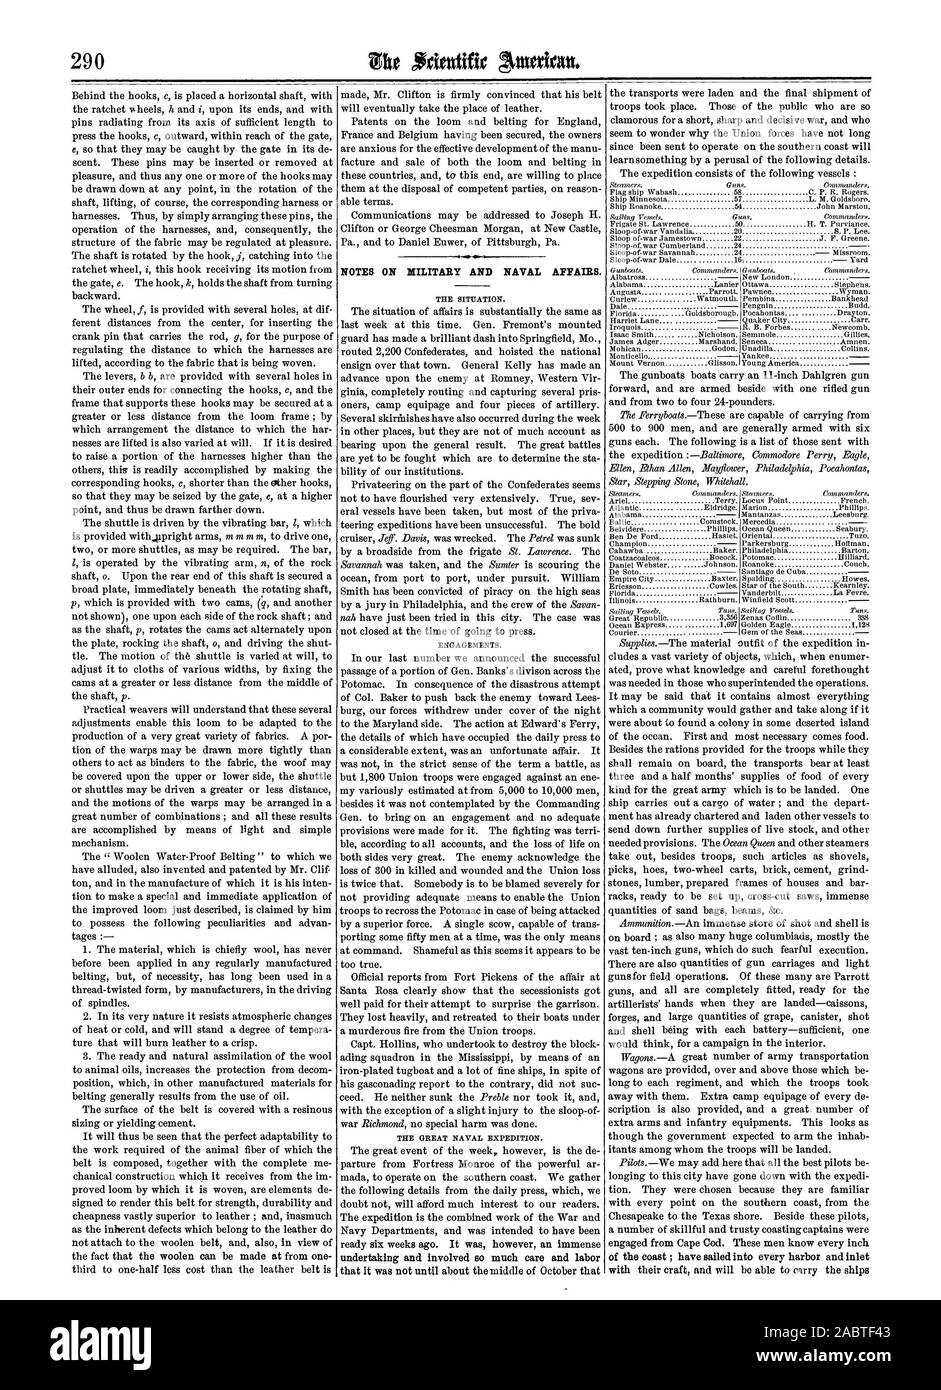 NOTES ON MILITARY AND NAVAL AFFAIRS., scientific american, 1861-11-09 Stock Photo